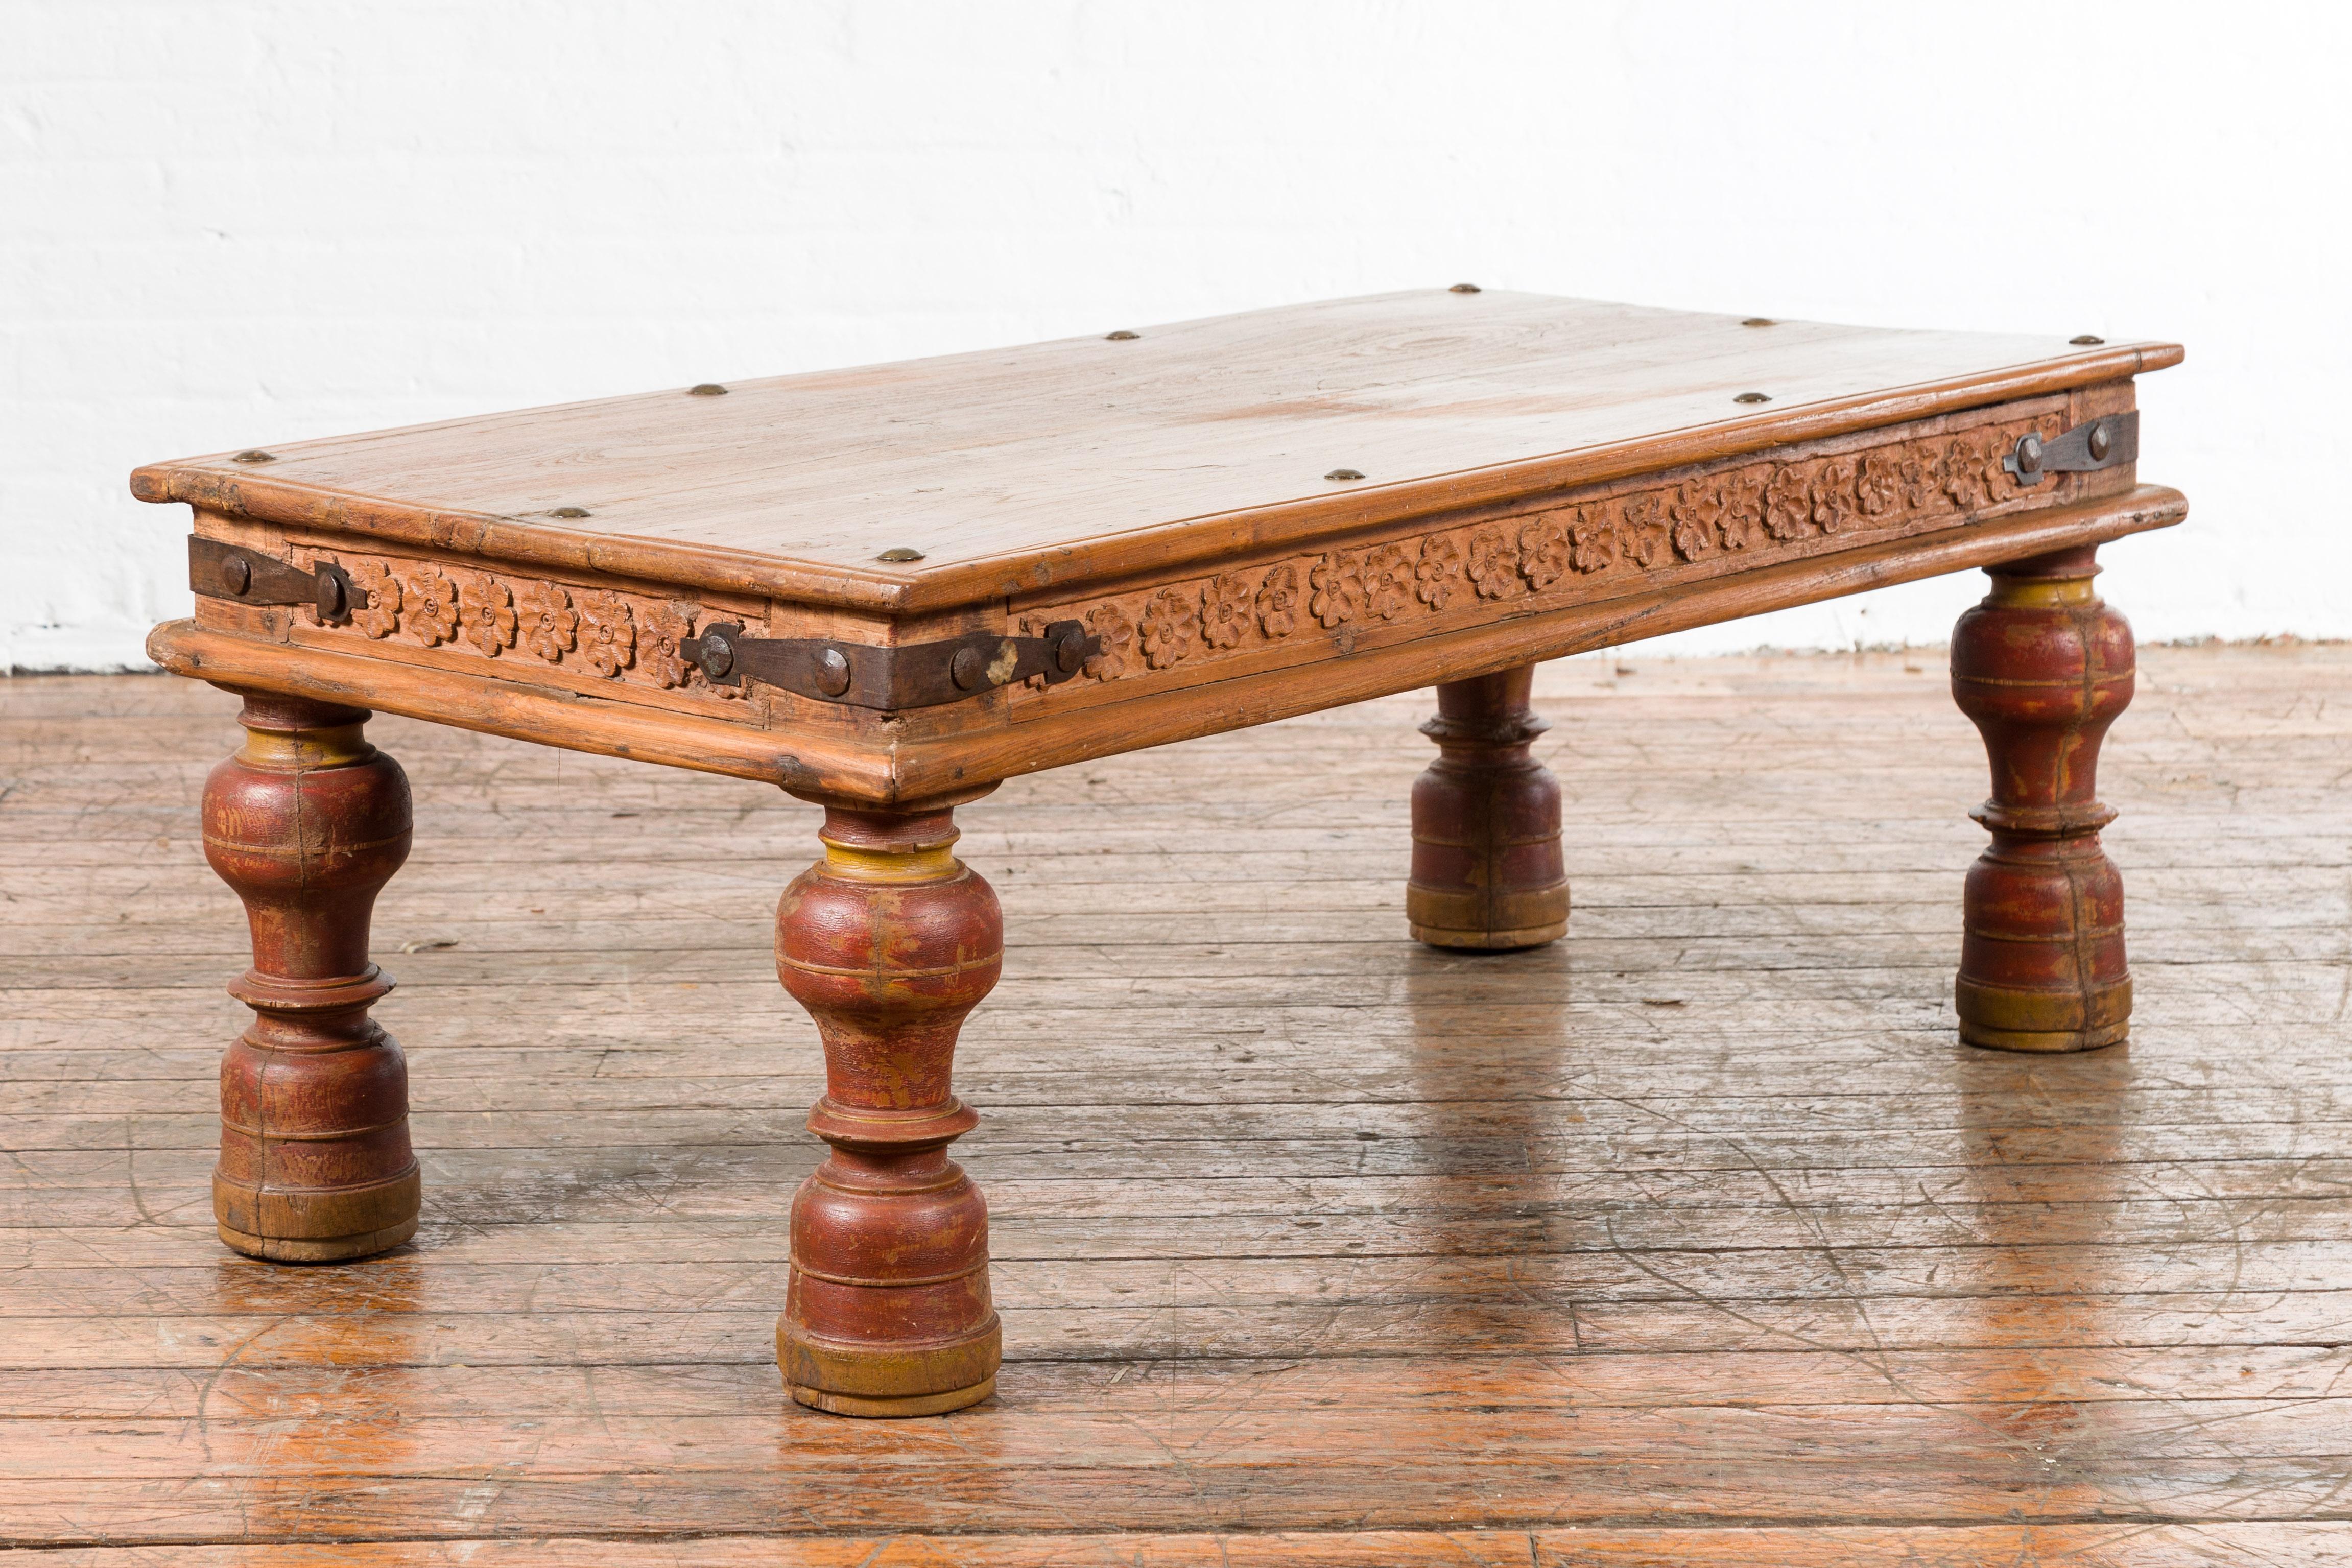 An Indian antique coffee table from the 19th century, with carved floral frieze, baluster legs and iron braces. Created in India during the 19th century, this wooden coffee table features a rectangular top with iron studs, sitting above an apron